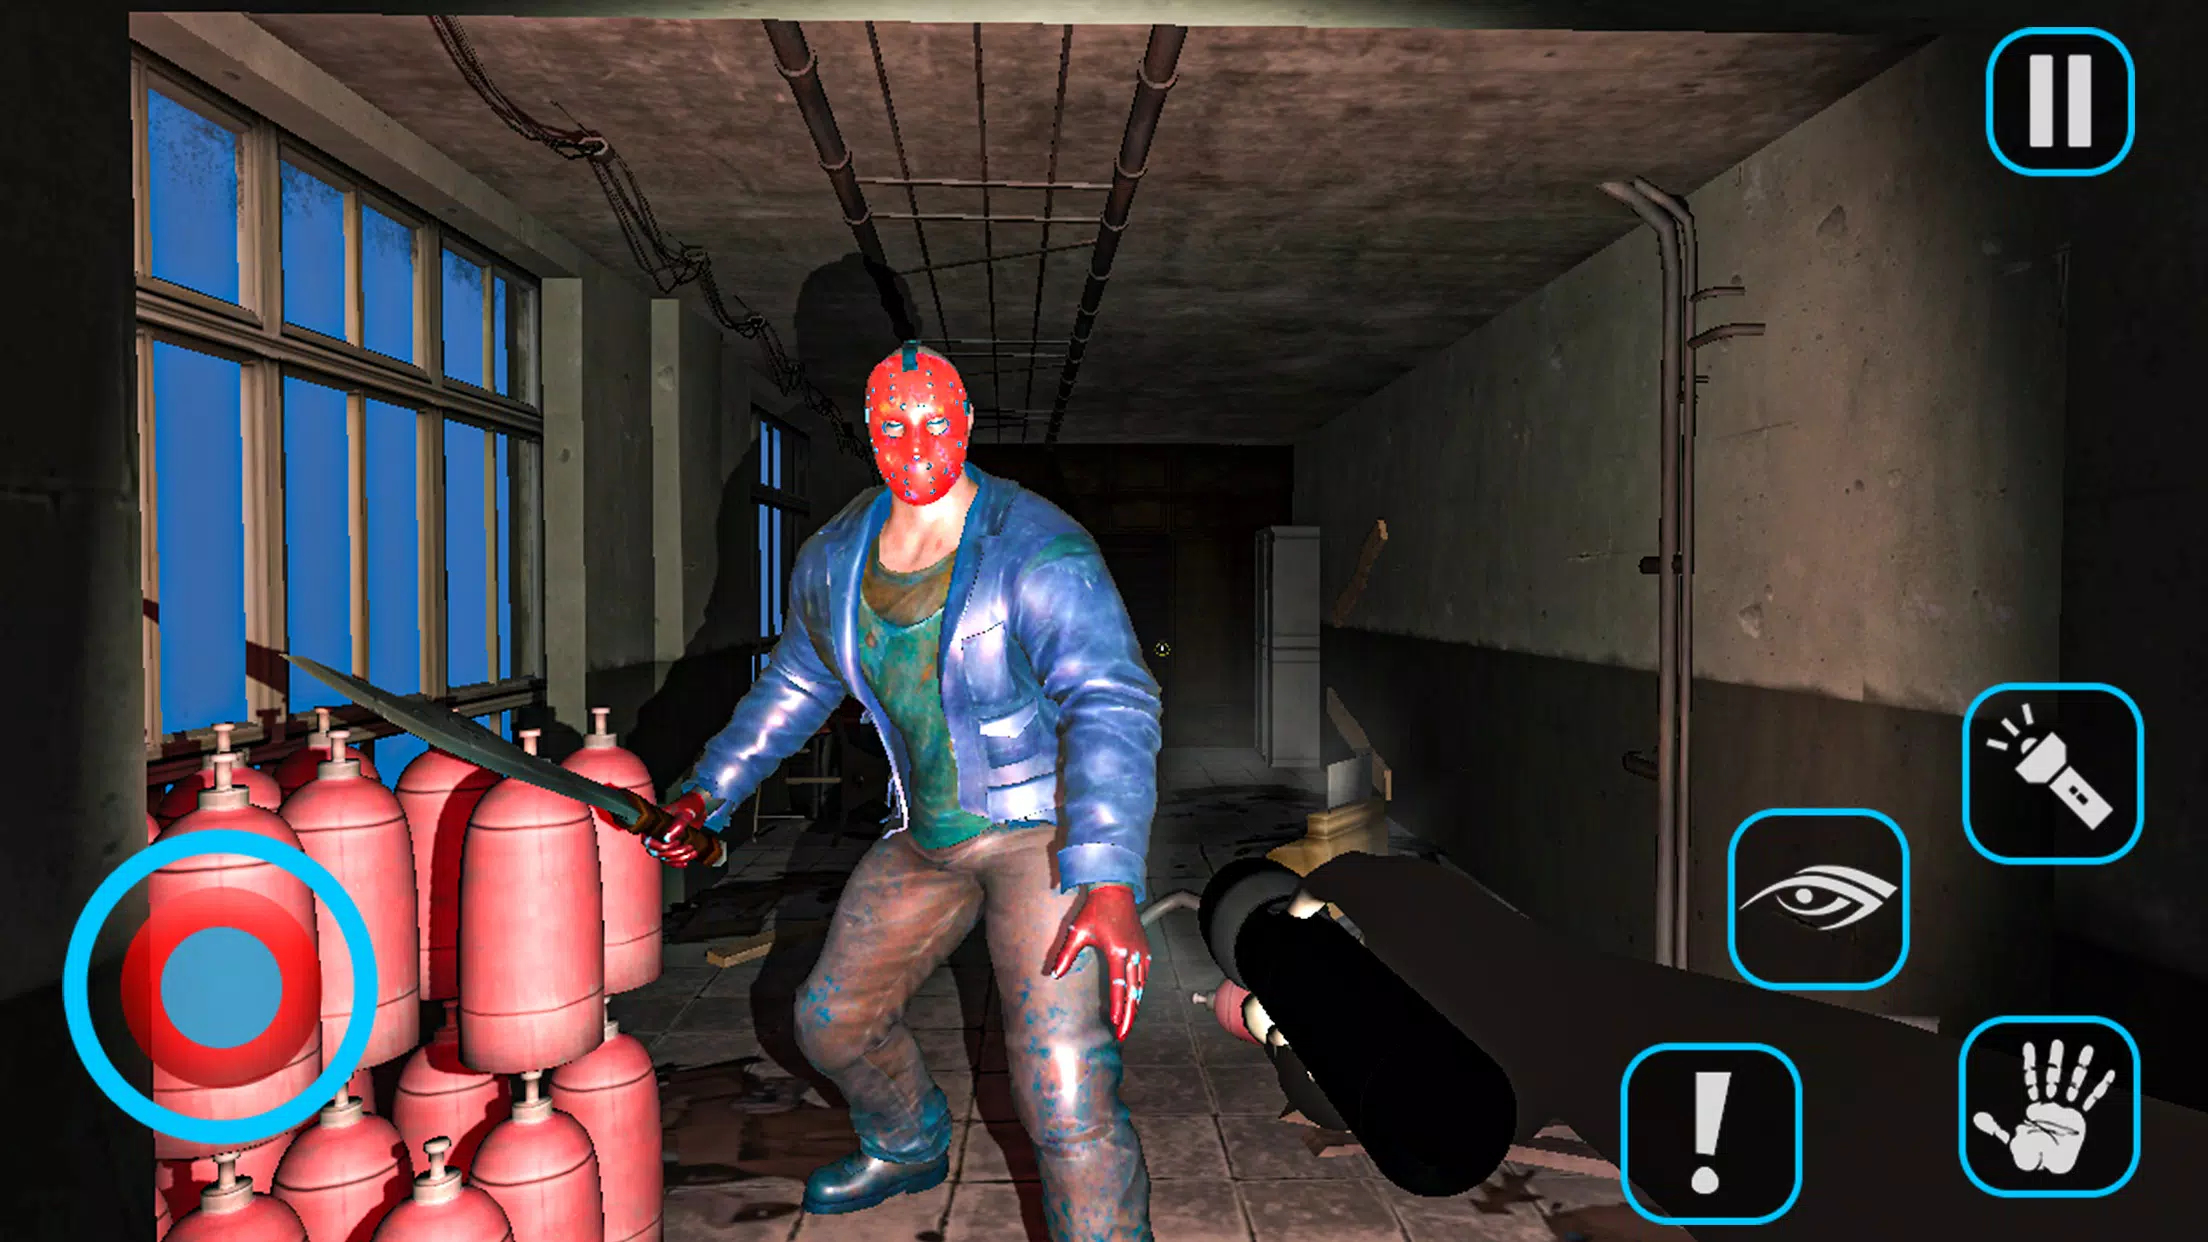 Download Alpha Friday the 13th Game For Android! - Friday The 13th